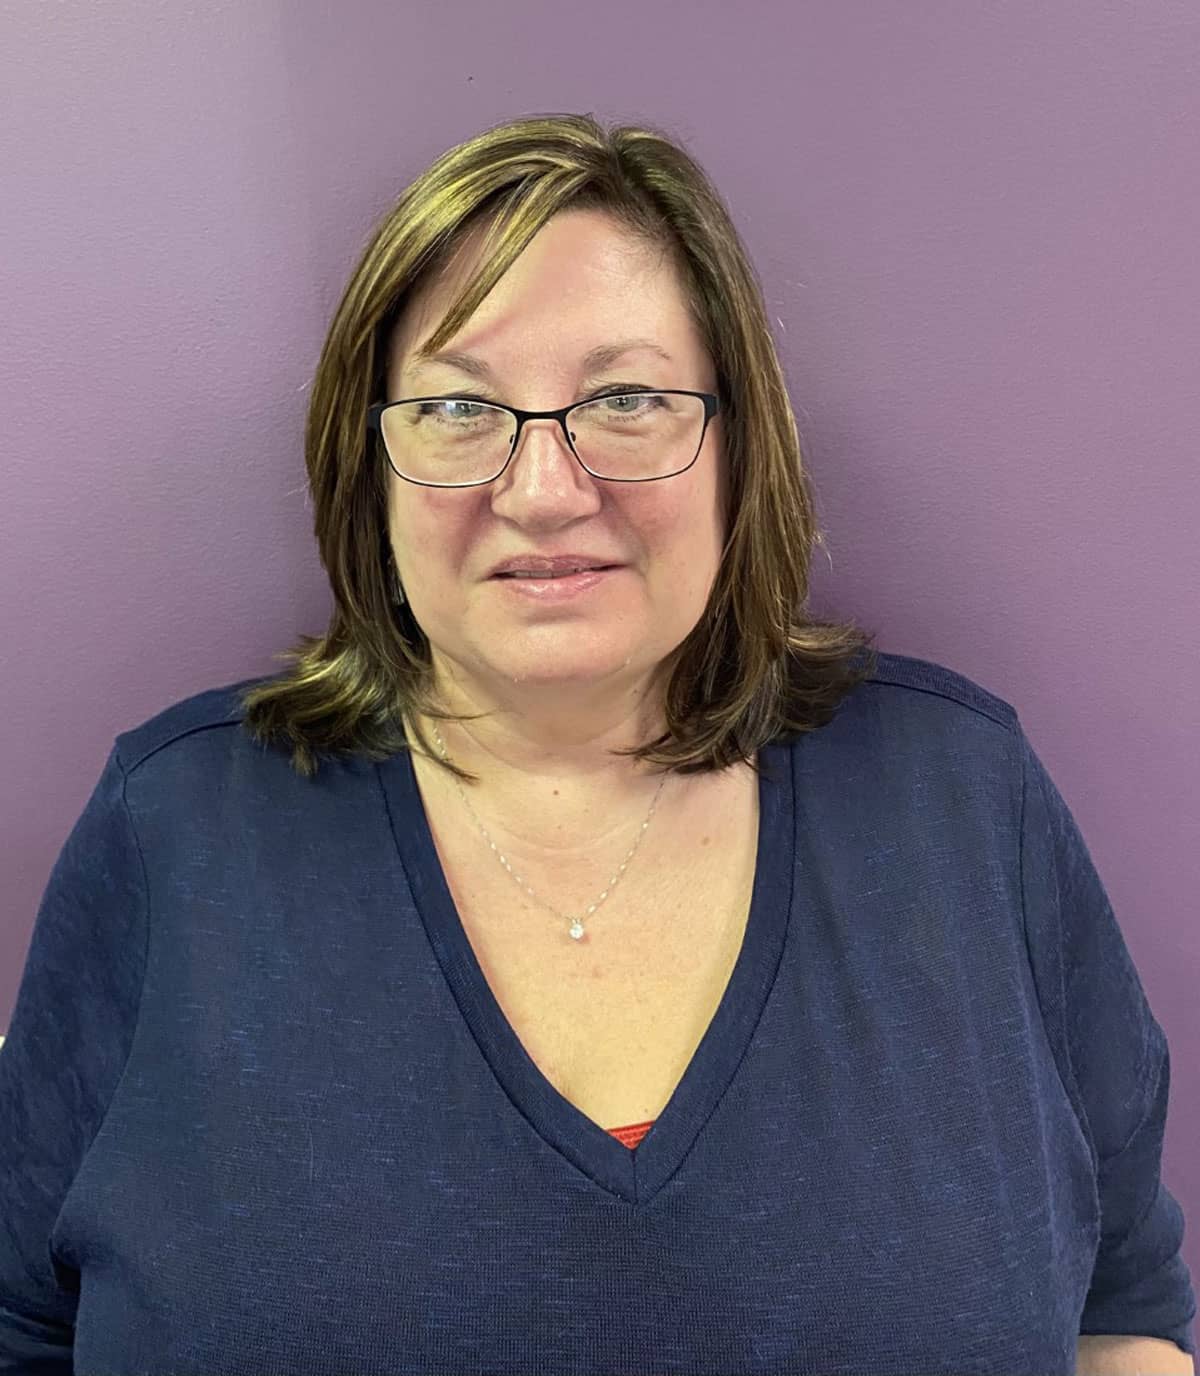 Terri bennet is our June 2022 Care professional of the month